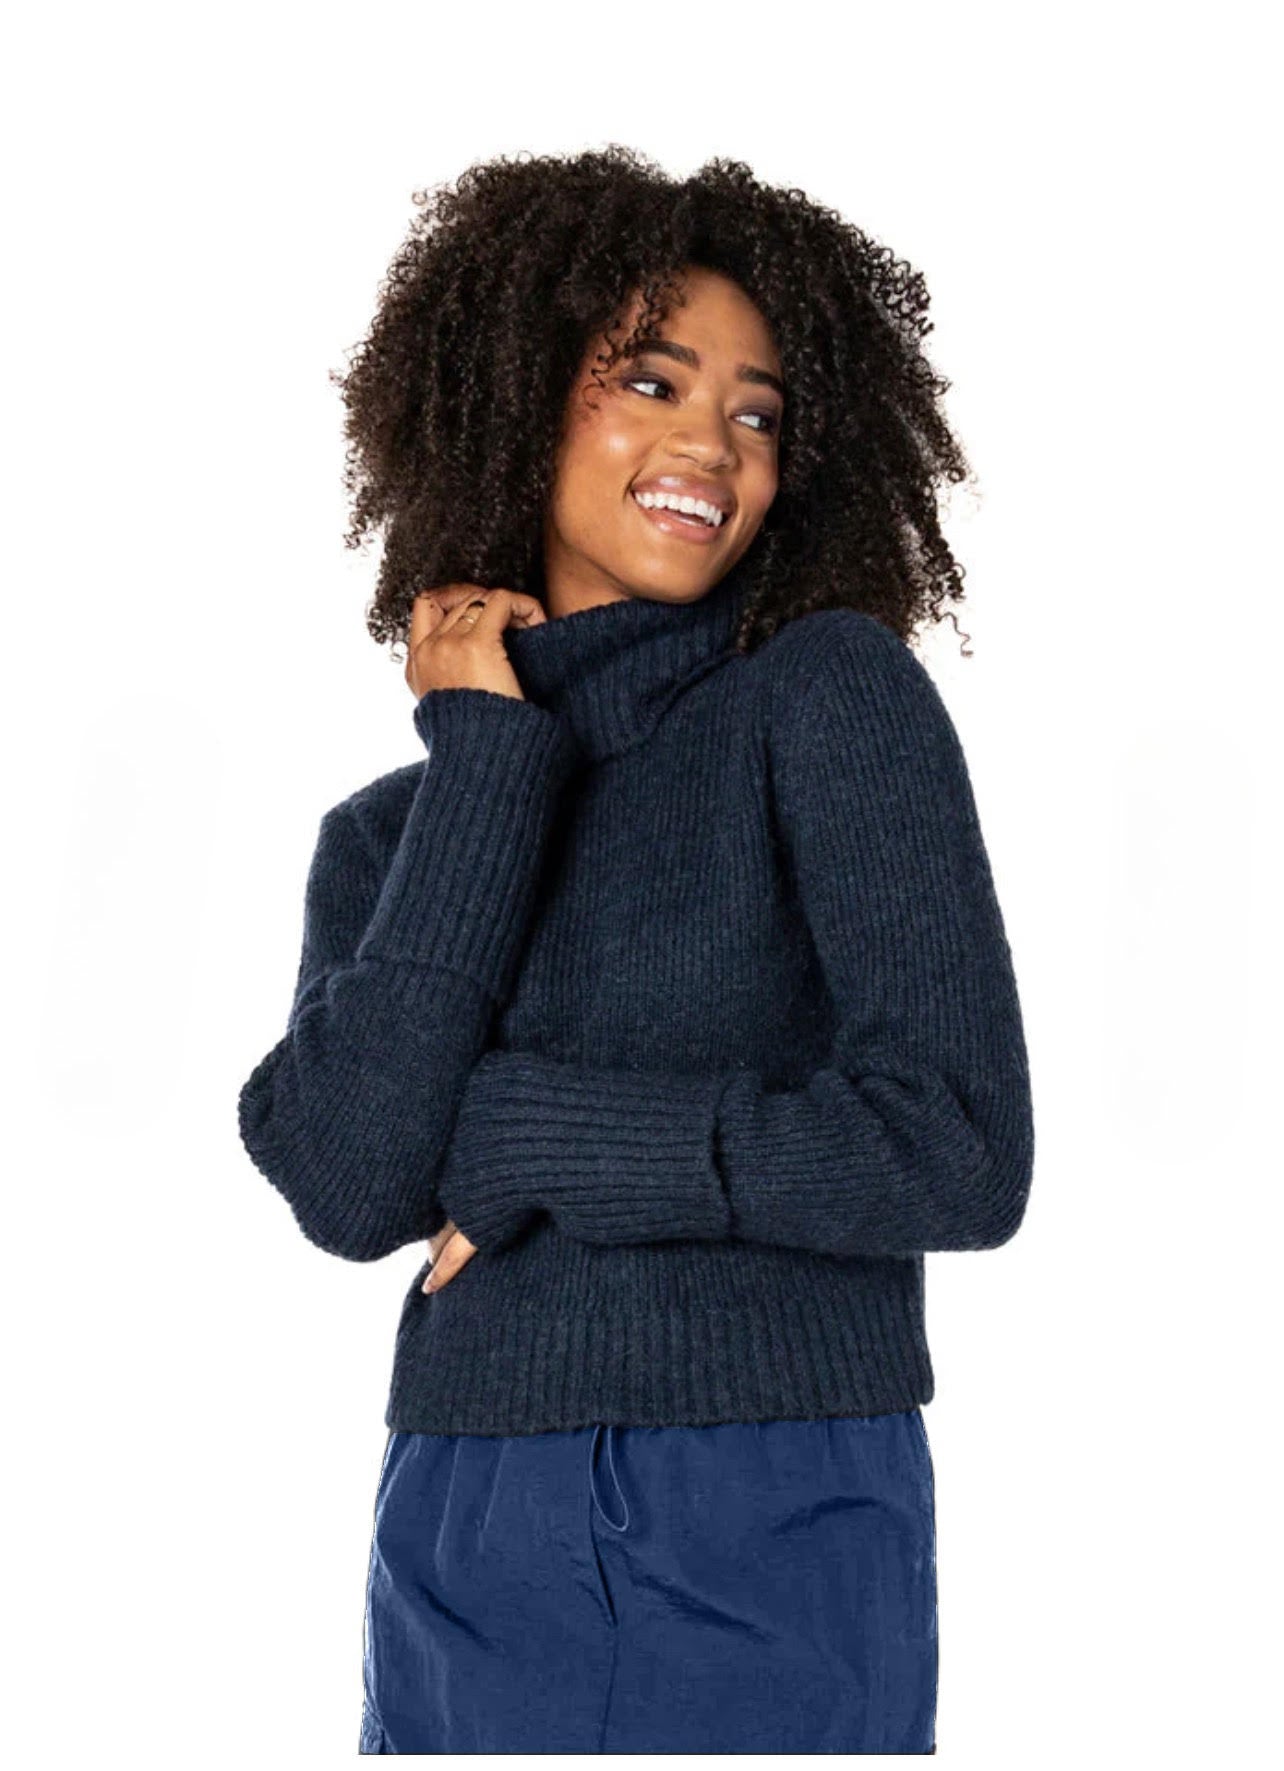 Navy Turtleneck by CES'T MOI